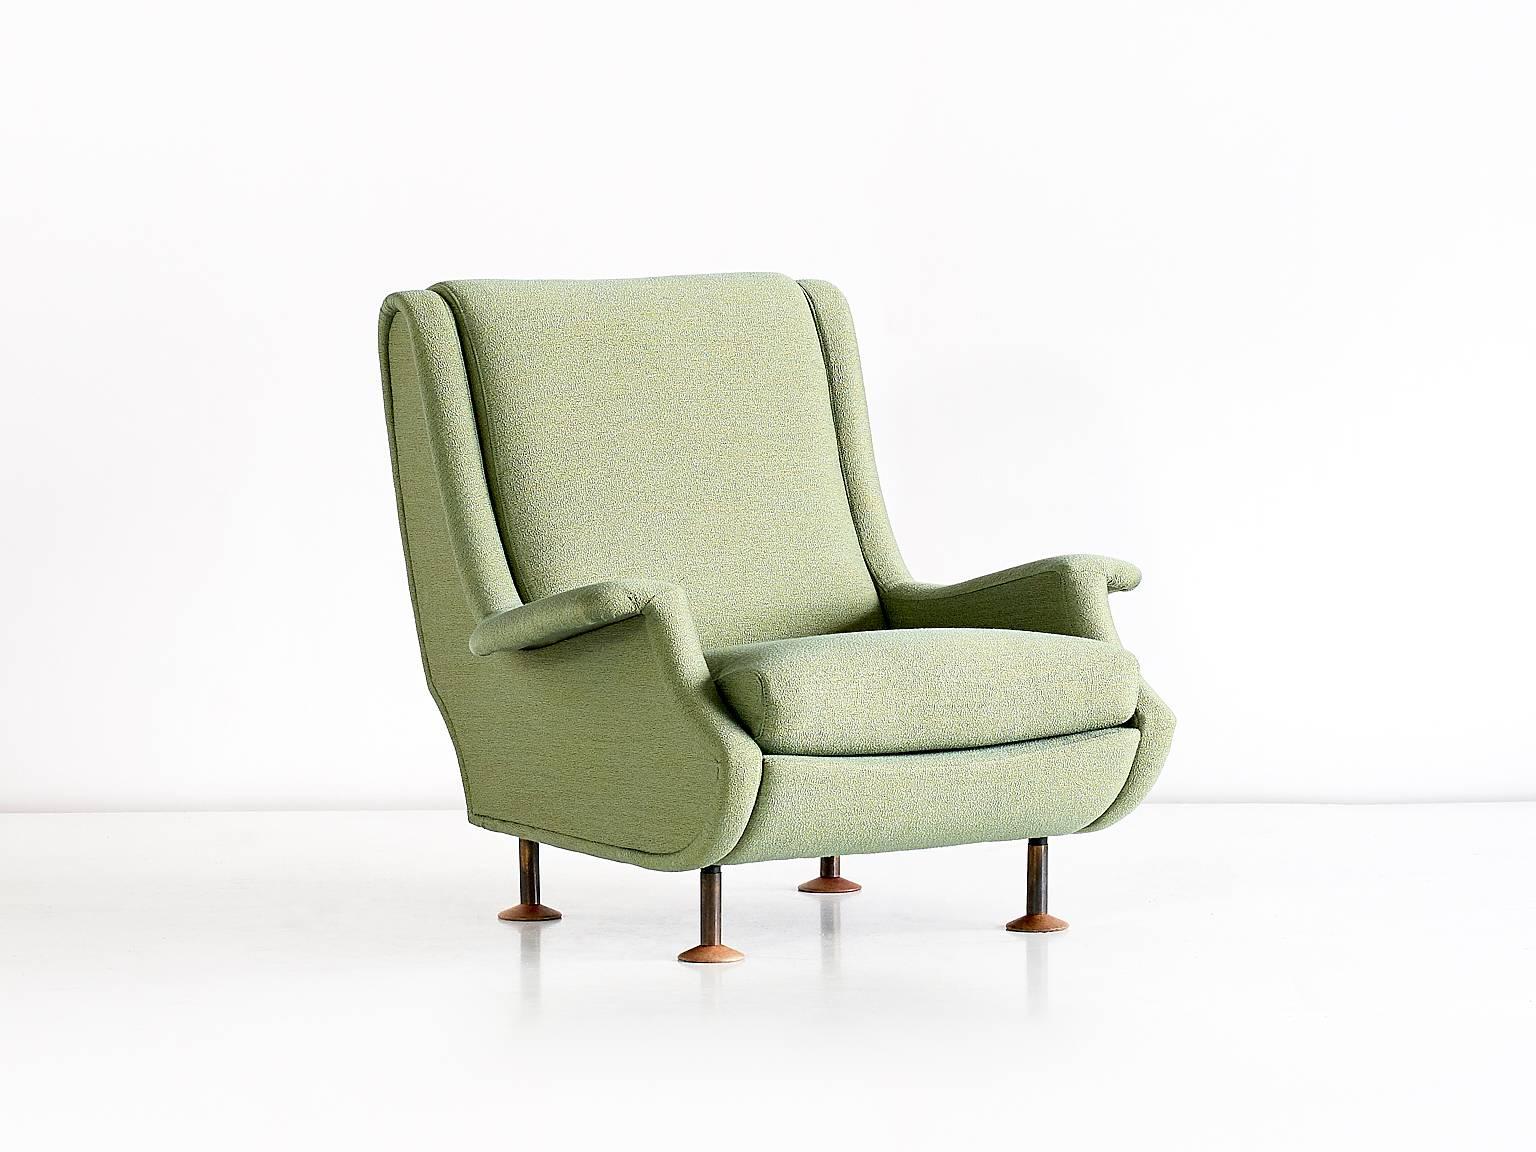 This very comfortable 'Regent' armchair was designed by Marco Zanuso and produced by Arflex in the 1960s. The lounge chair has been fully reconditioned and professionally re-upholstered in a golden green Rubelli Tadao fabric. We can provide a sample